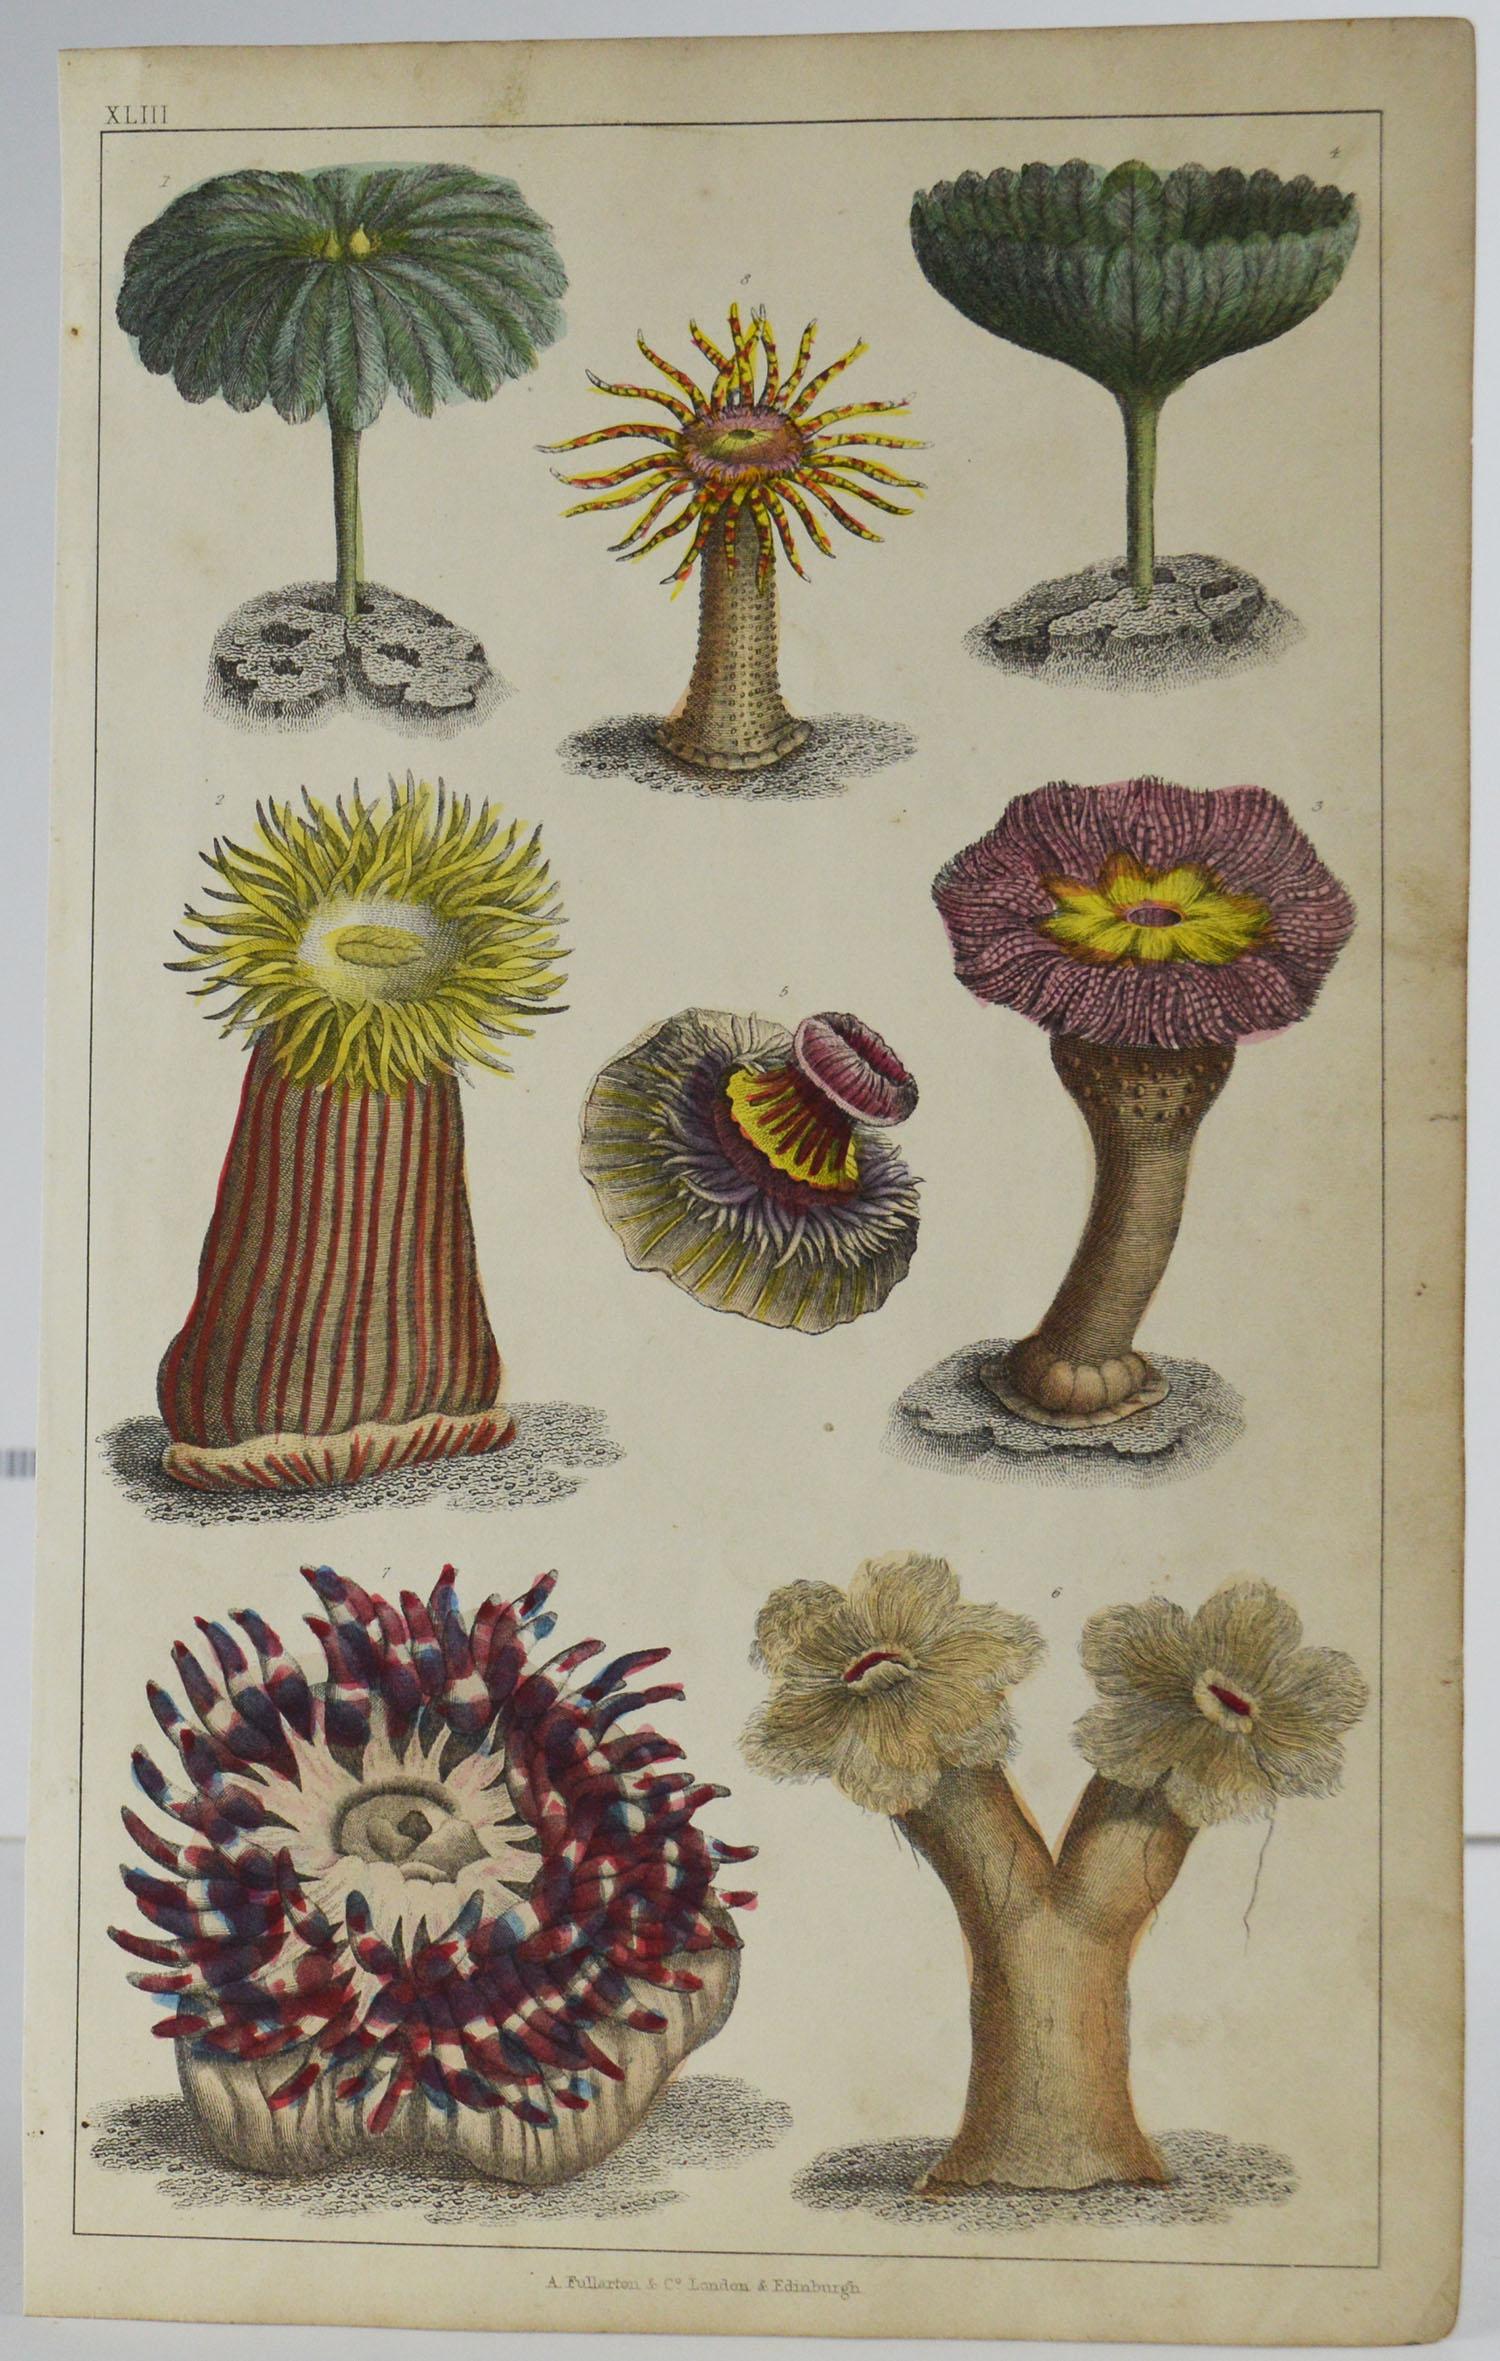 Other Set of 12 Antique Natural History Prints, 1847